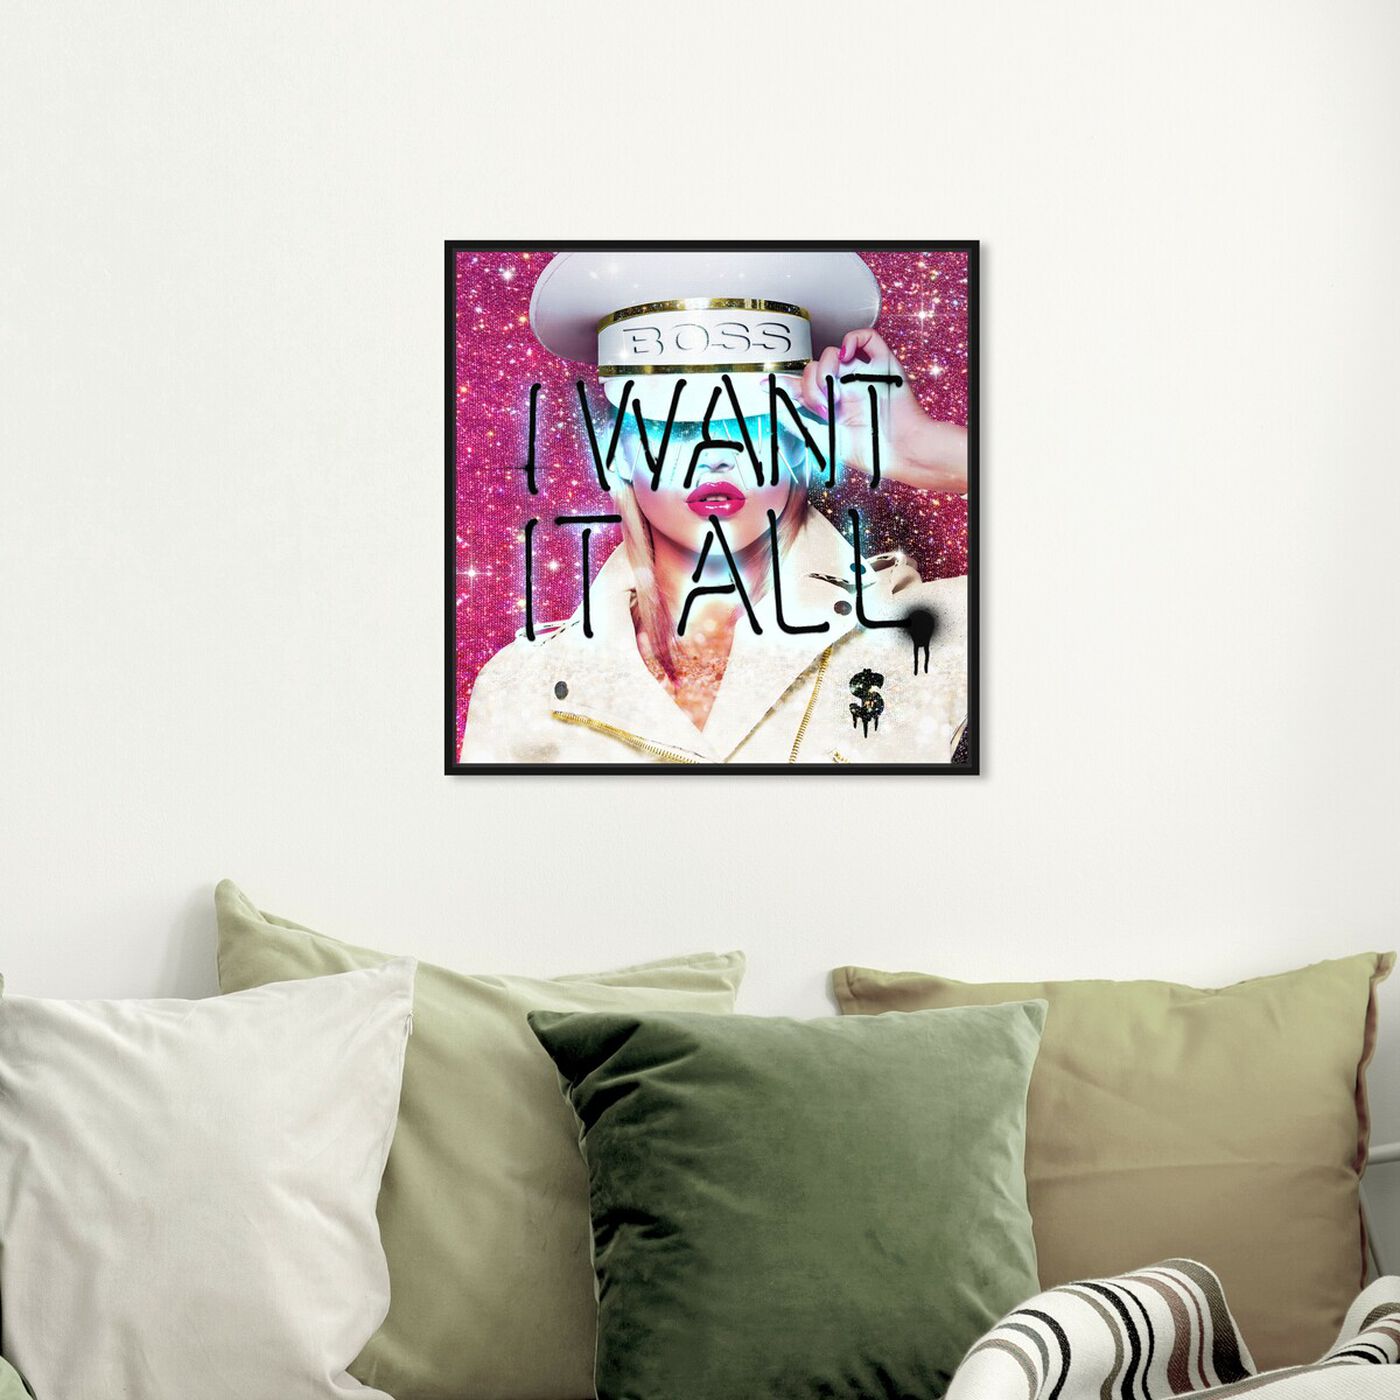 Hanging view of Want It All Chief featuring fashion and glam and lifestyle art.